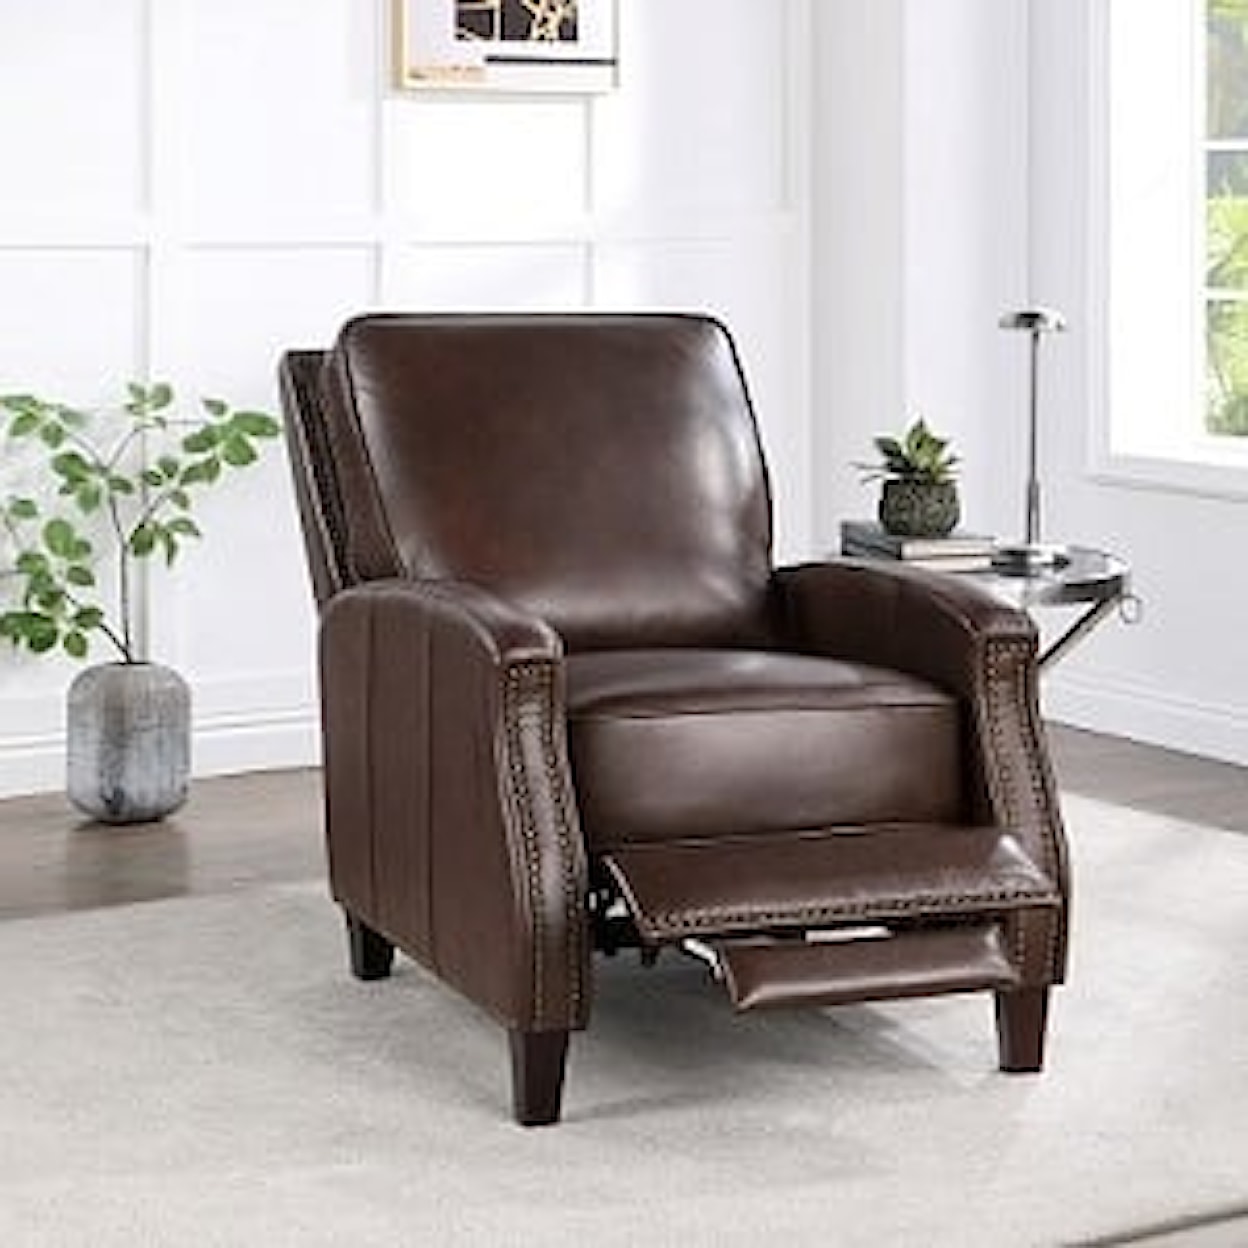 Acme Furniture Venice Accent Chair